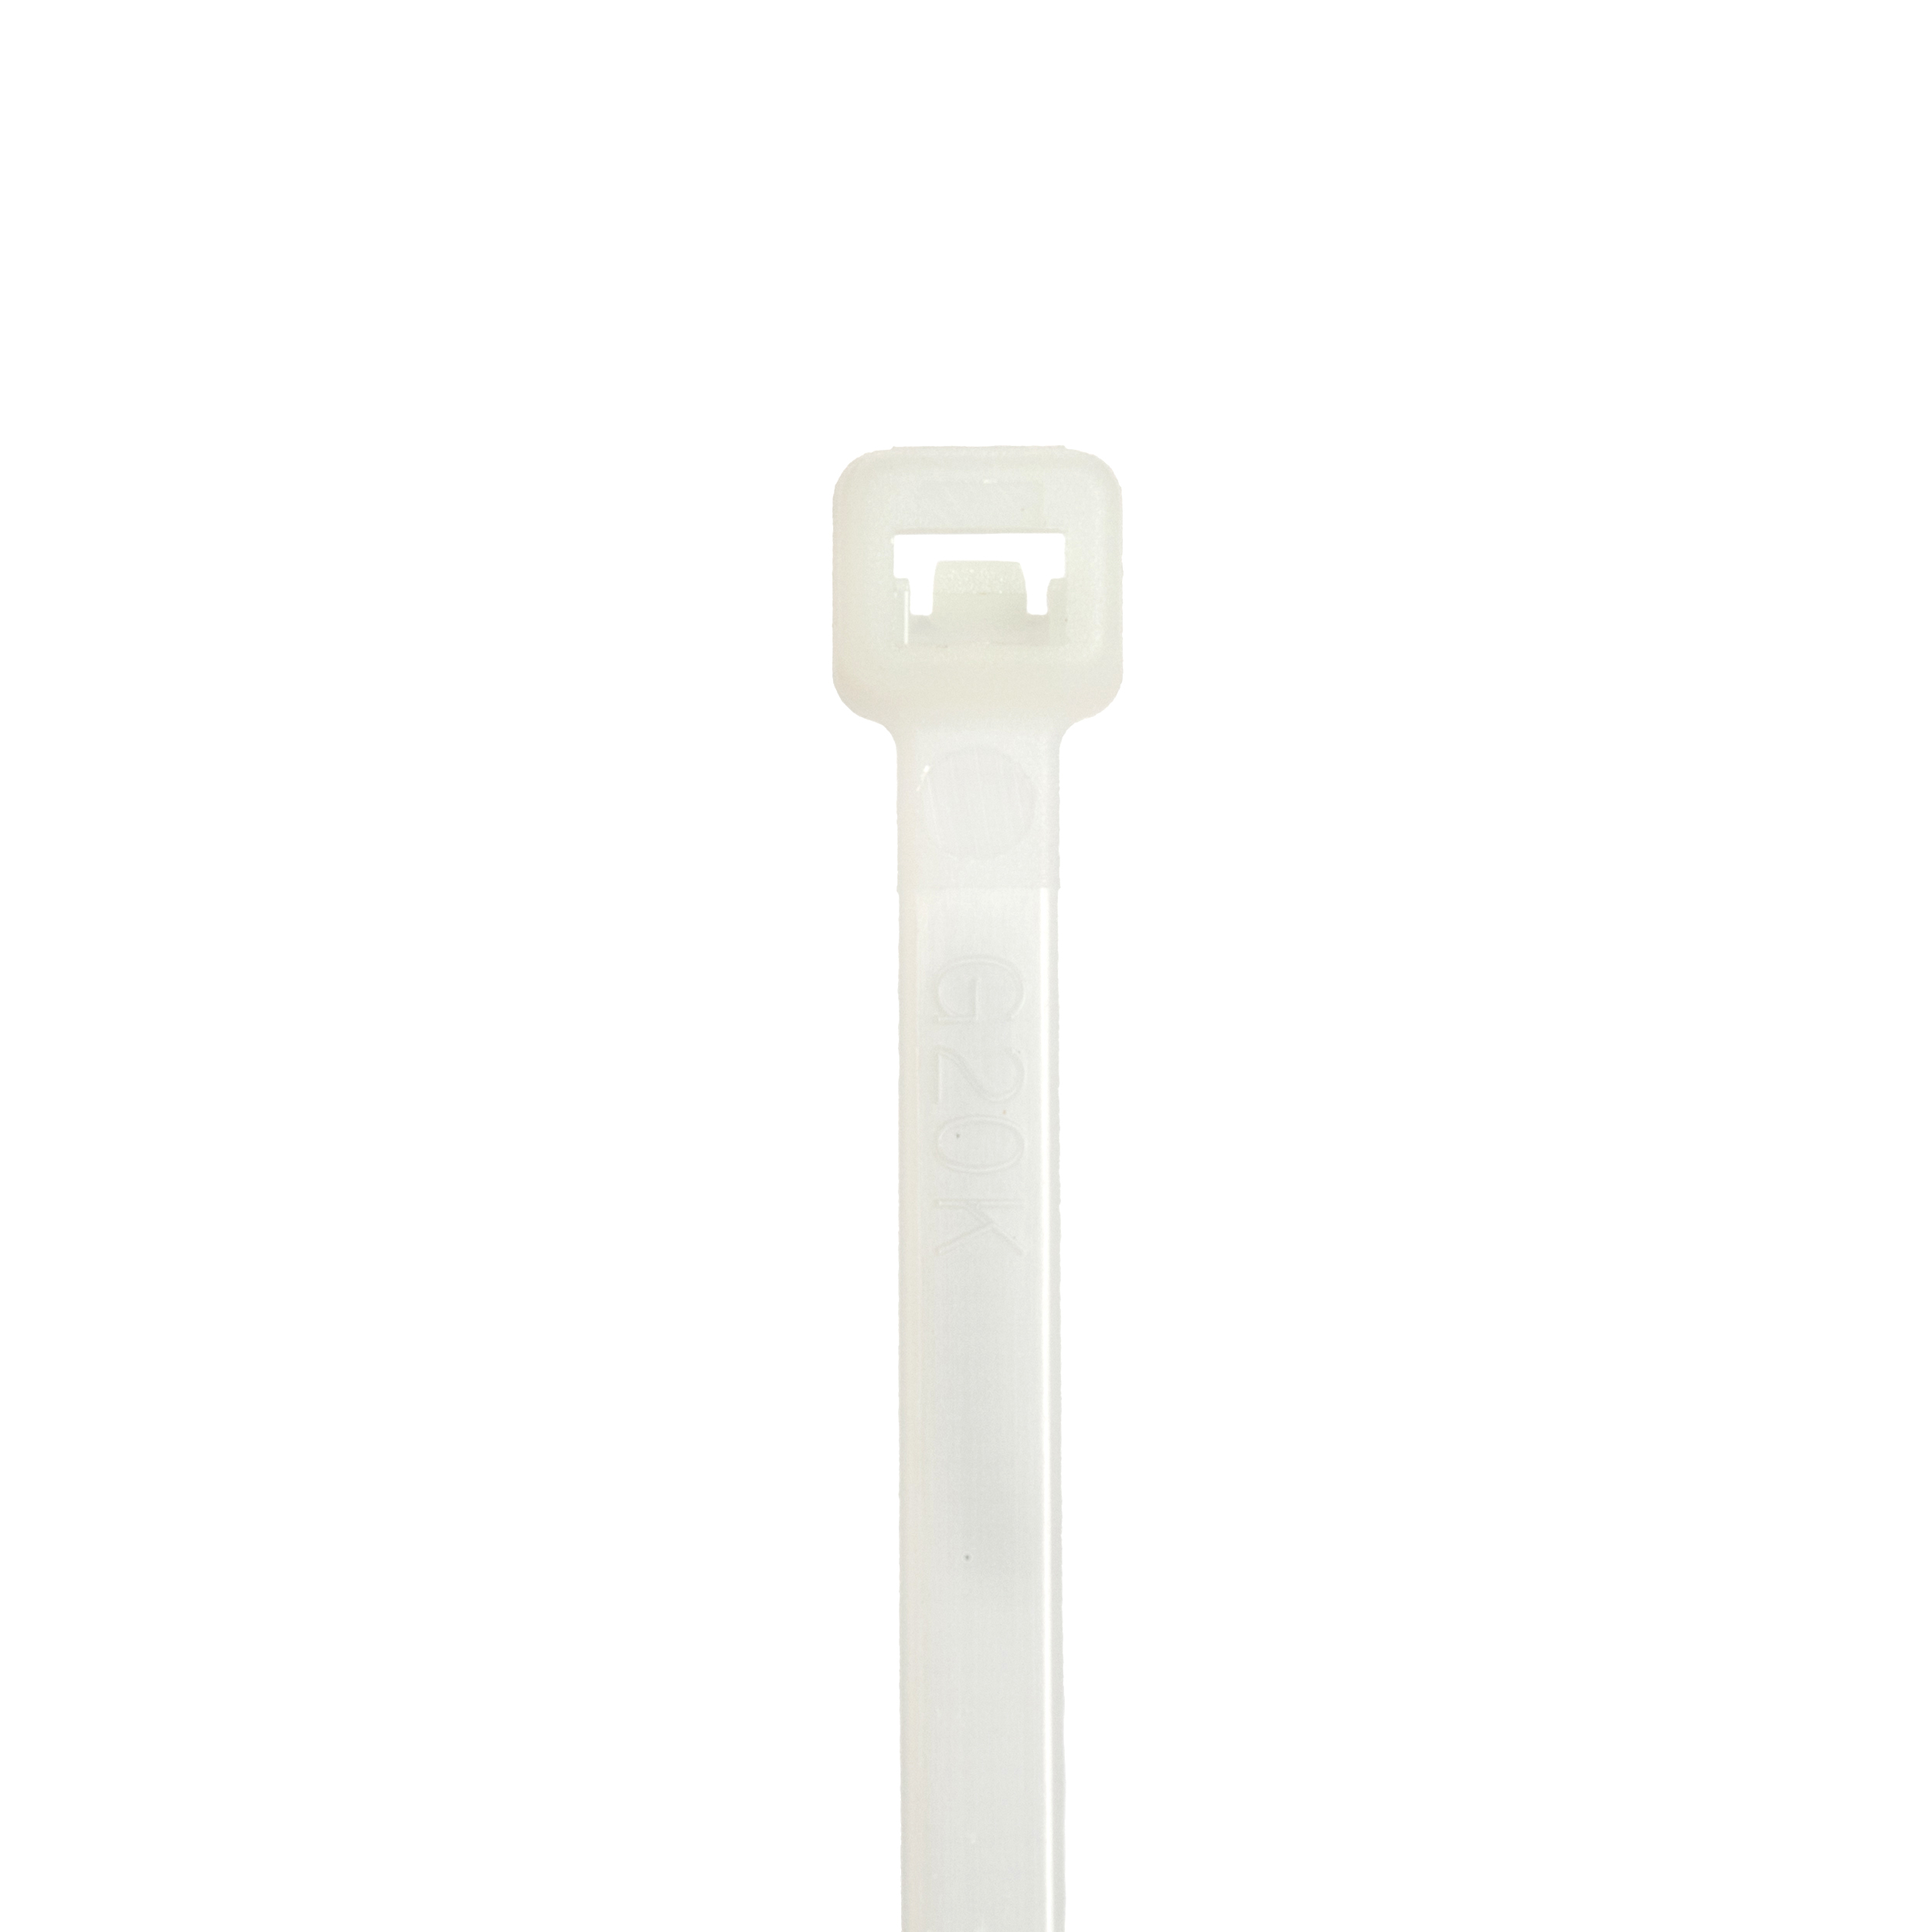 PAN S4-18-C 3.94" CABLE TIE 18TS NAT URAL